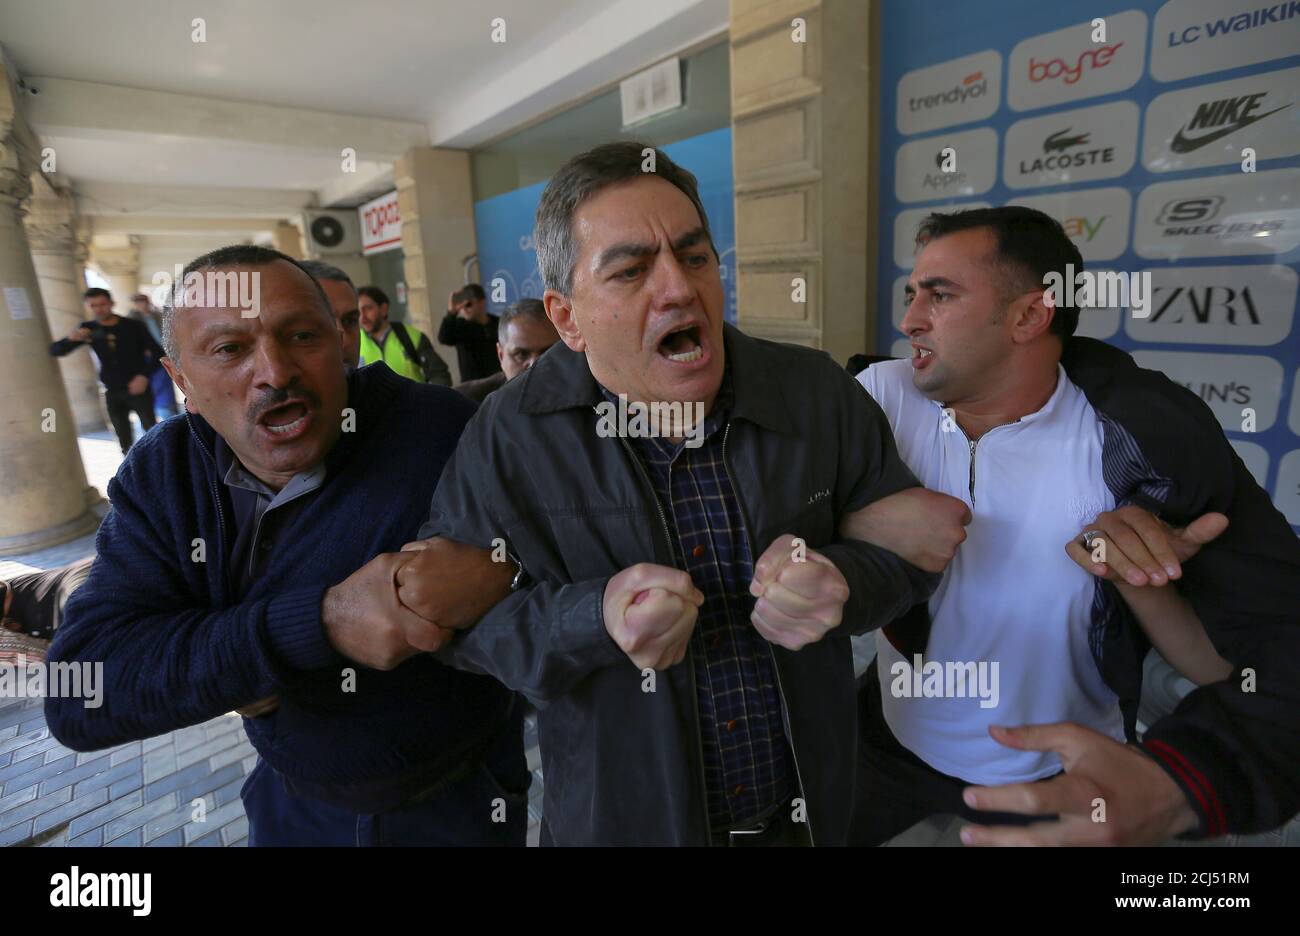 Head of the Popular Front Party of Azerbaijan Ali Karimli and his supporters hold an unauthorized rally to demand the freedom of assembly in Baku, Azerbaijan October 19, 2019. REUTERS/Aziz Karimov Stock Photo